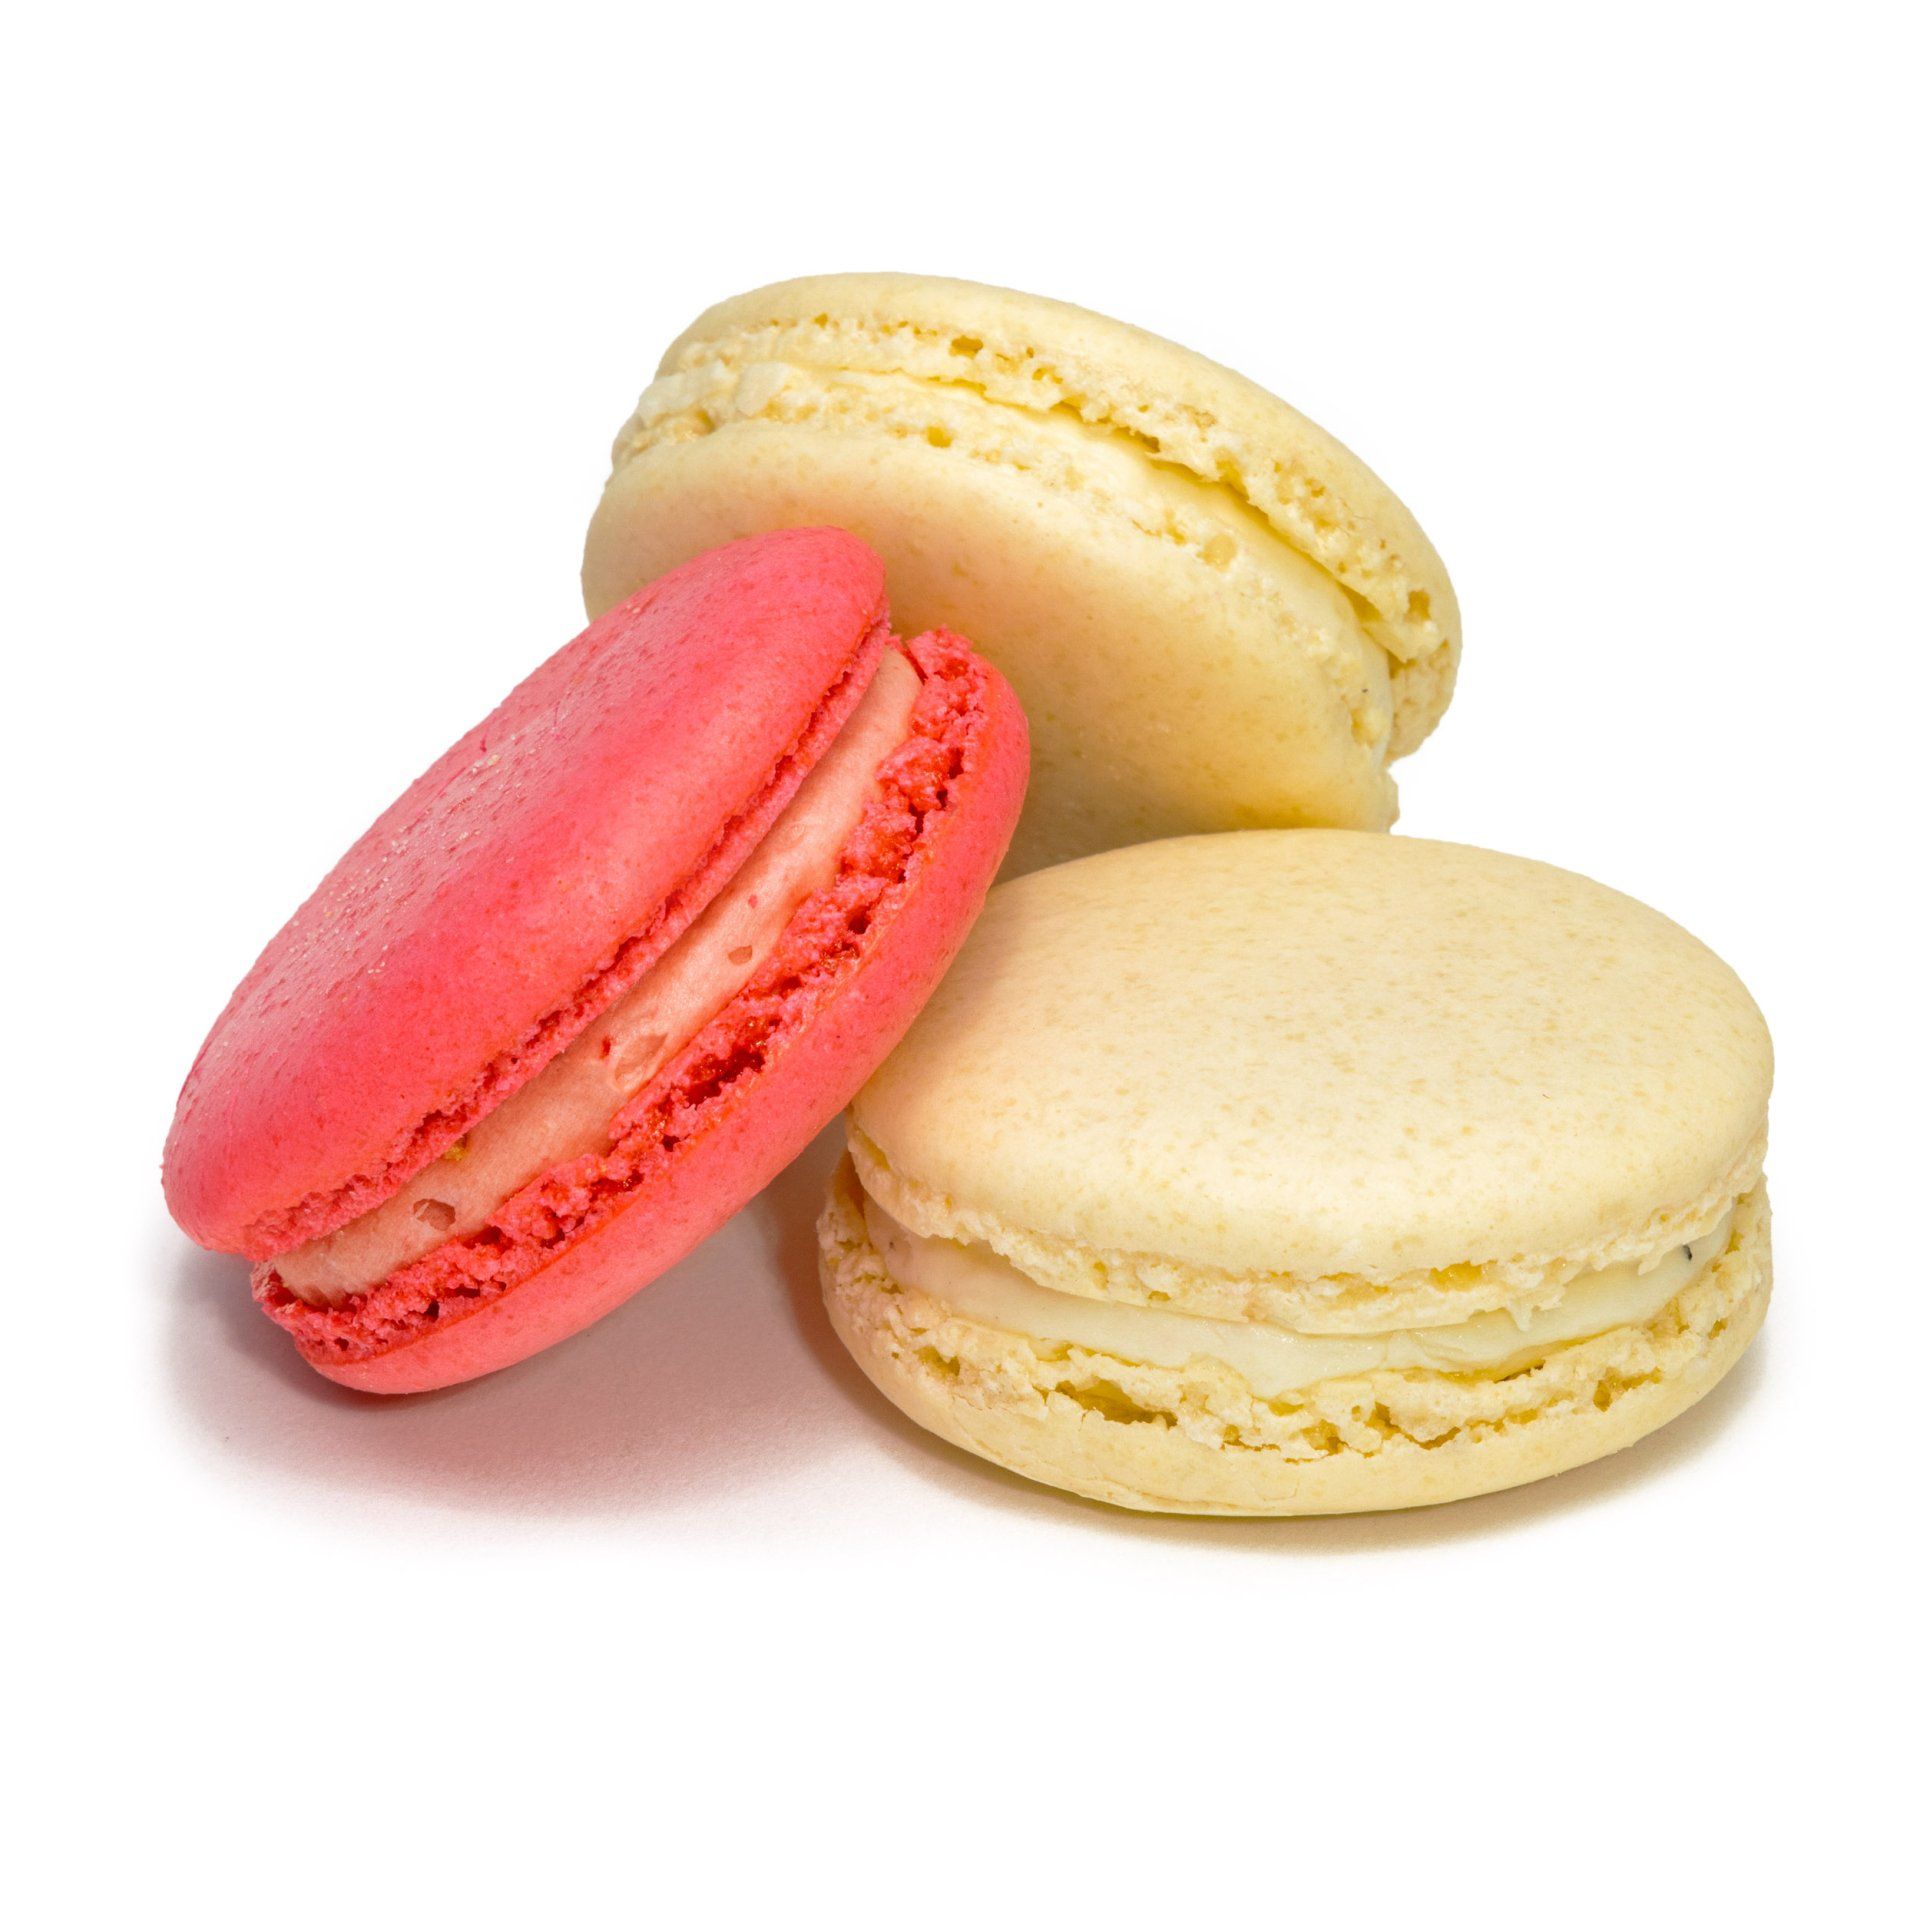 macaroon or food product photography example